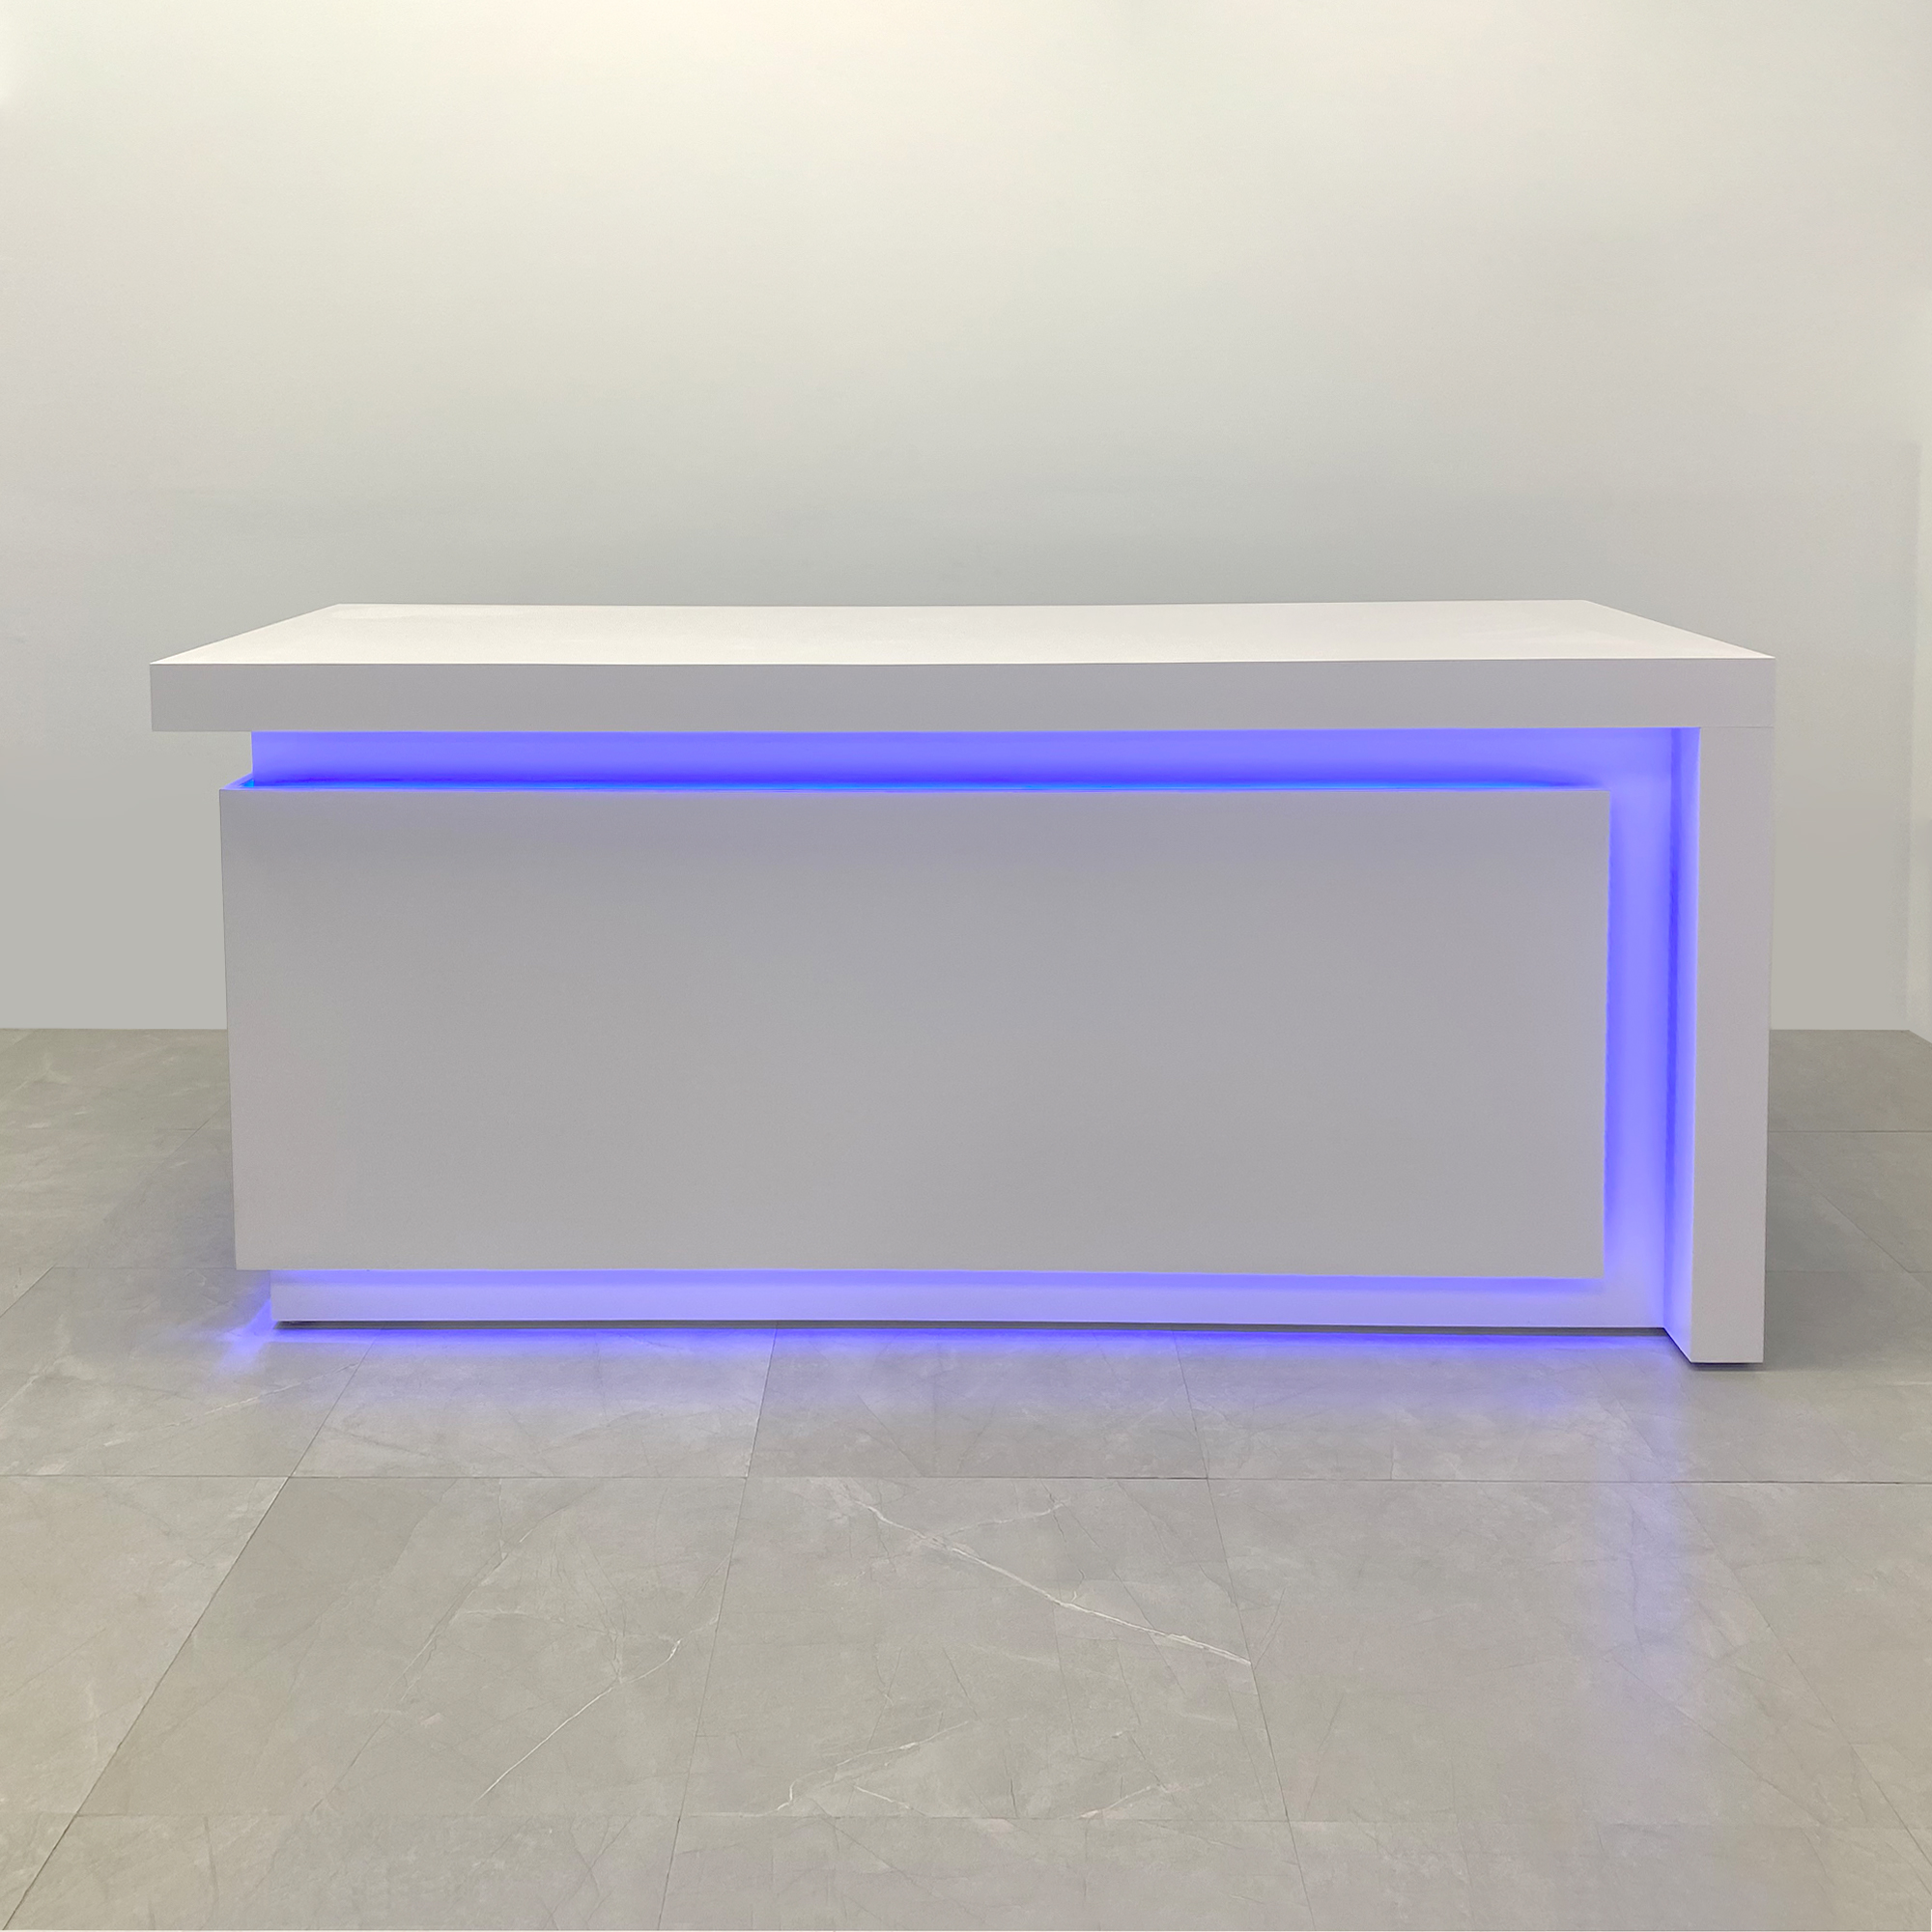 90-inch New York L-Shape Retail Custom Reception Desk in dover off-white matte laminate desk, with color LED, shown here.